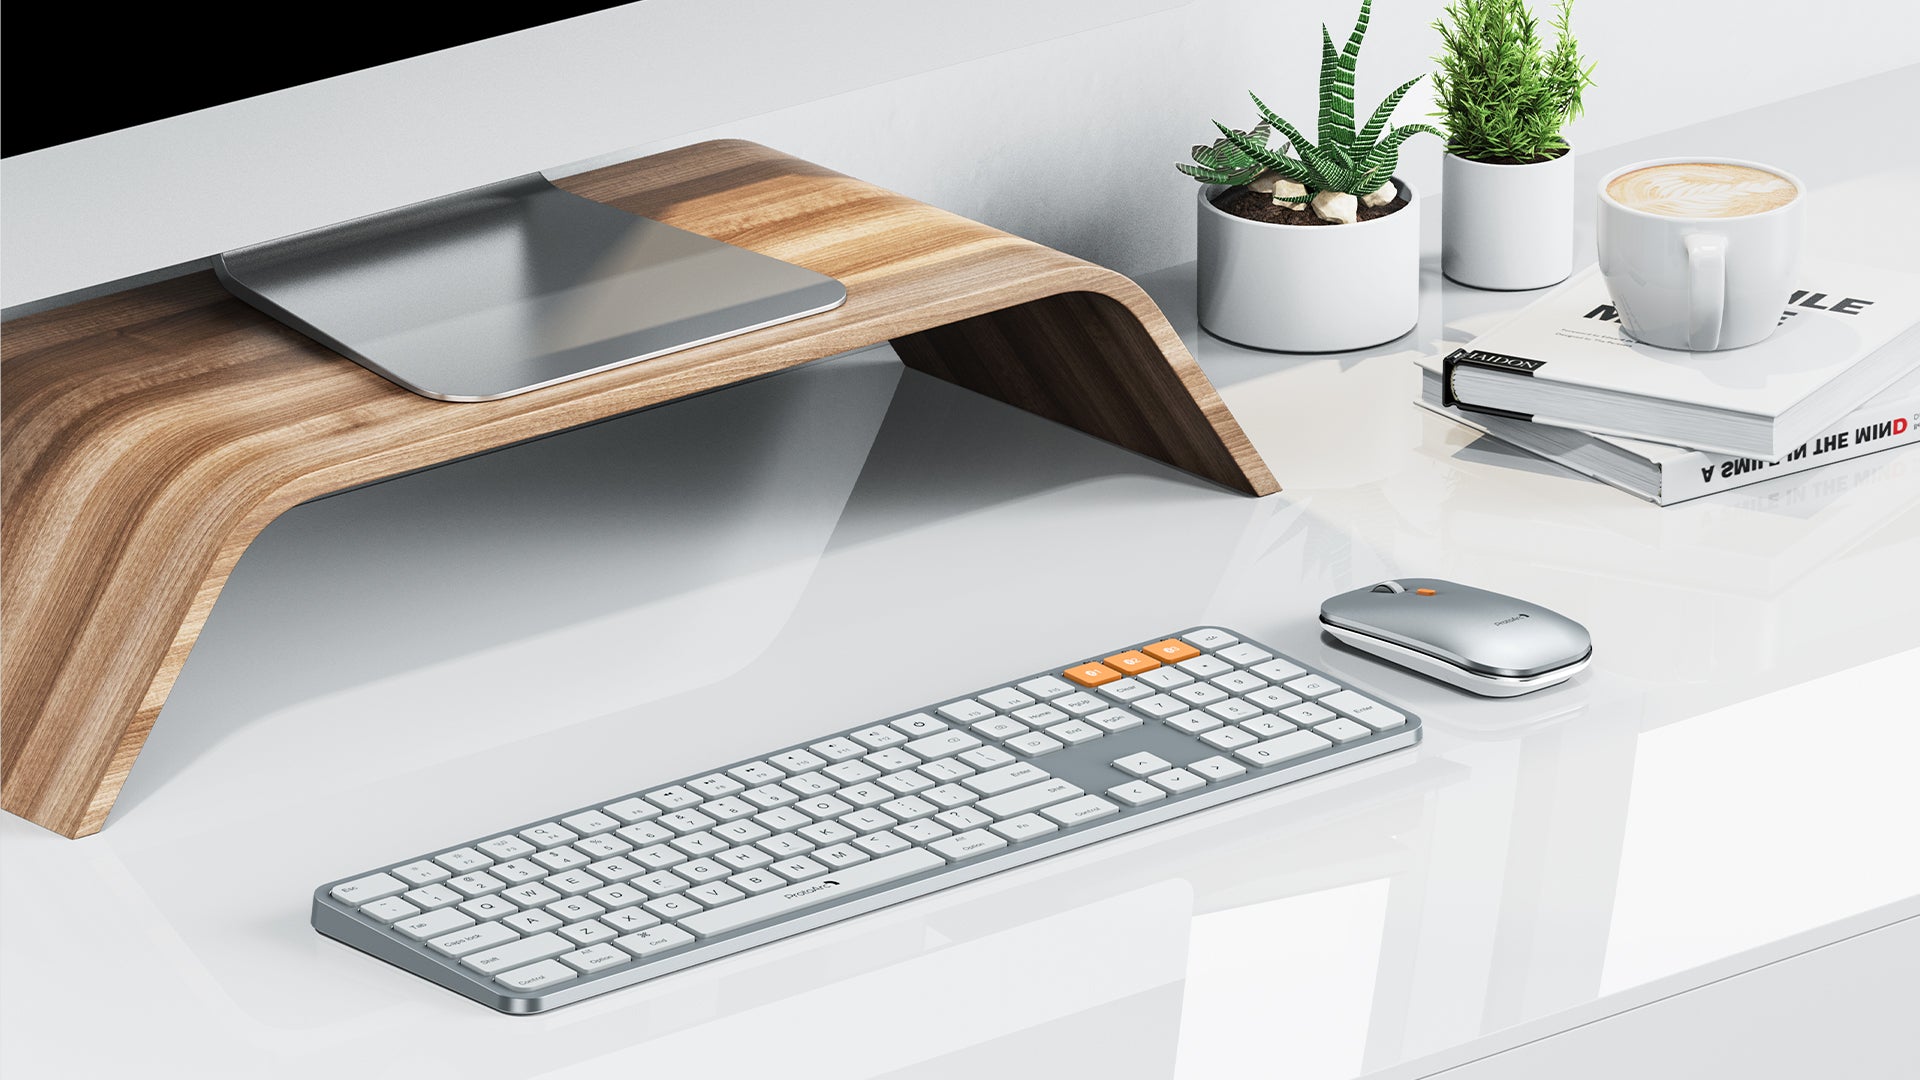 KM100-A Backlit Bluetooth Keyboard and Mouse Combo